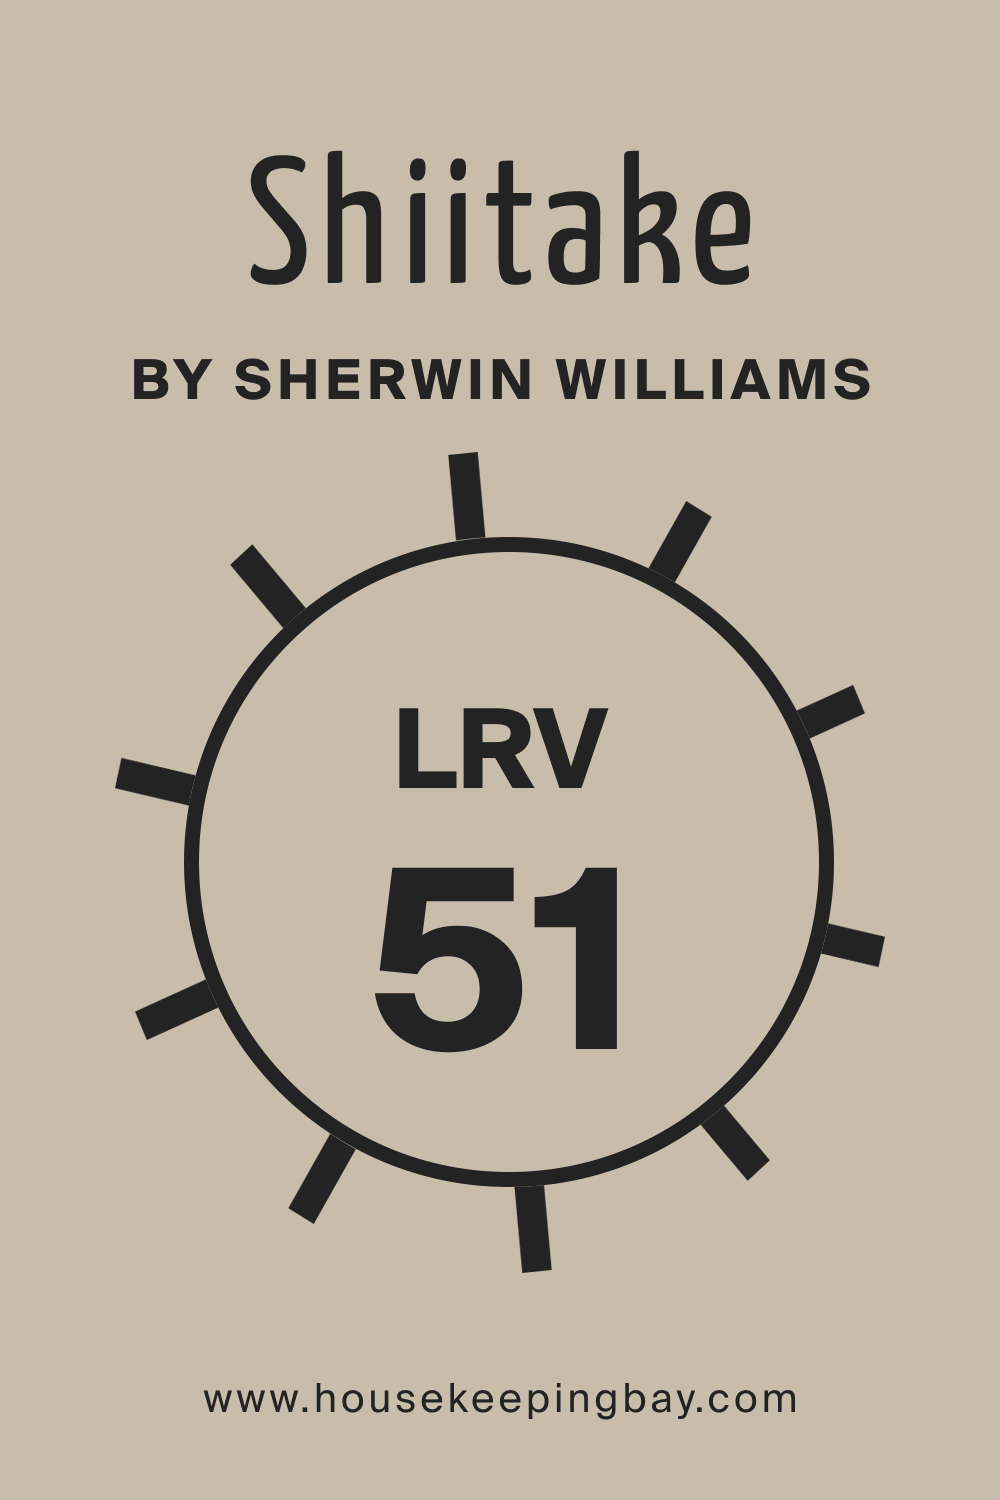 What Is the LRV of SW Shiitake Paint Color